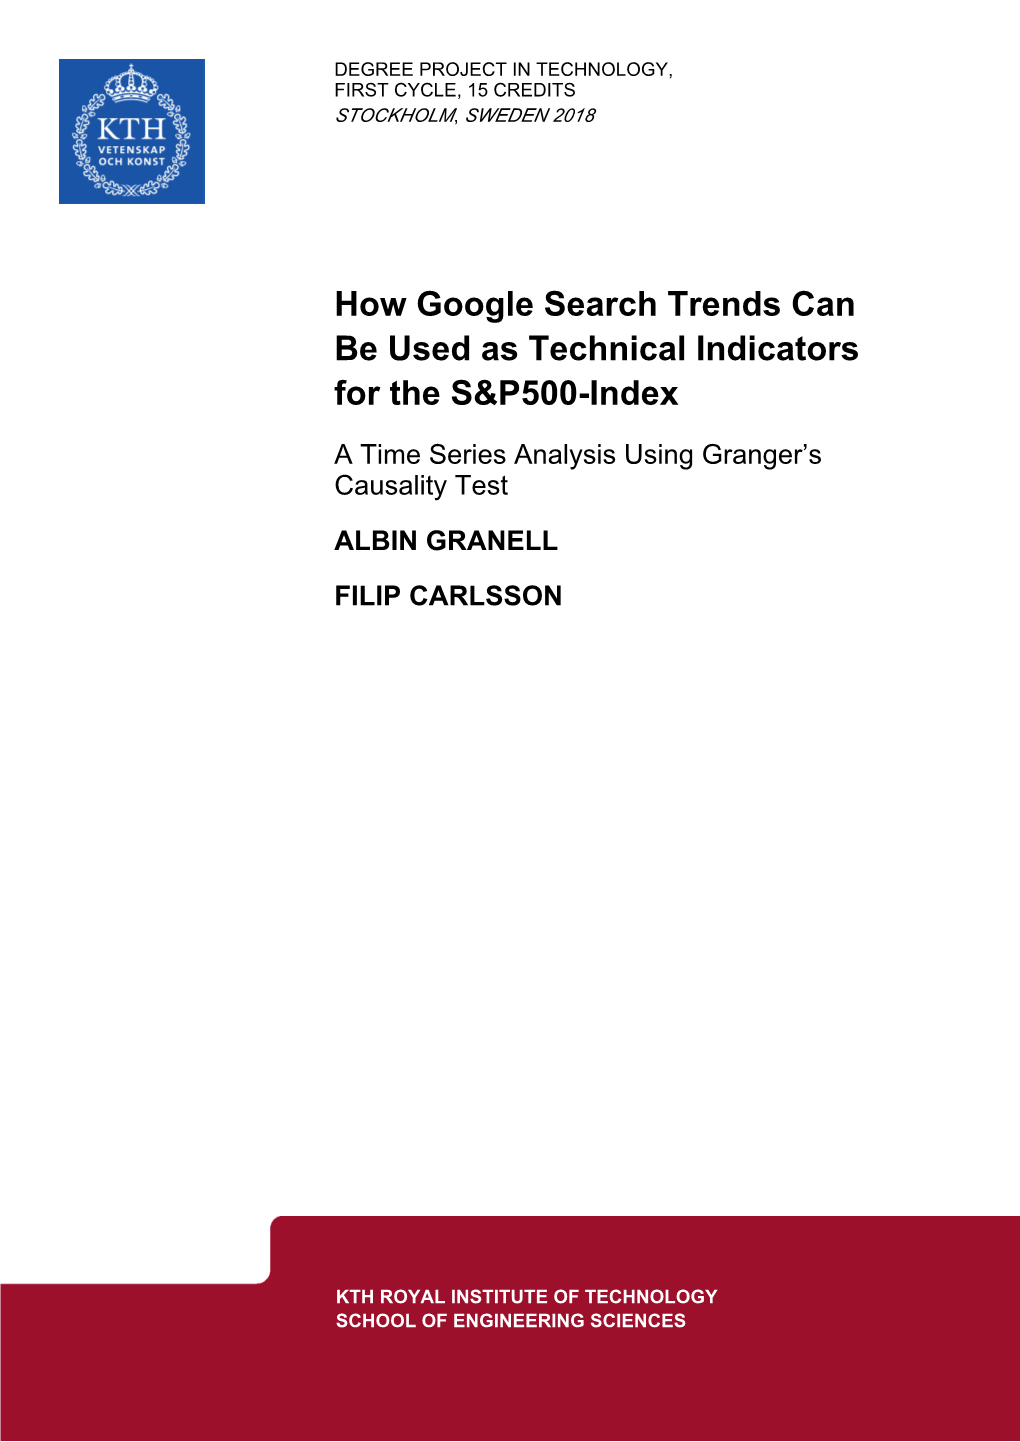 How Google Search Trends Can Be Used As Technical Indicators for the S&P500-Index